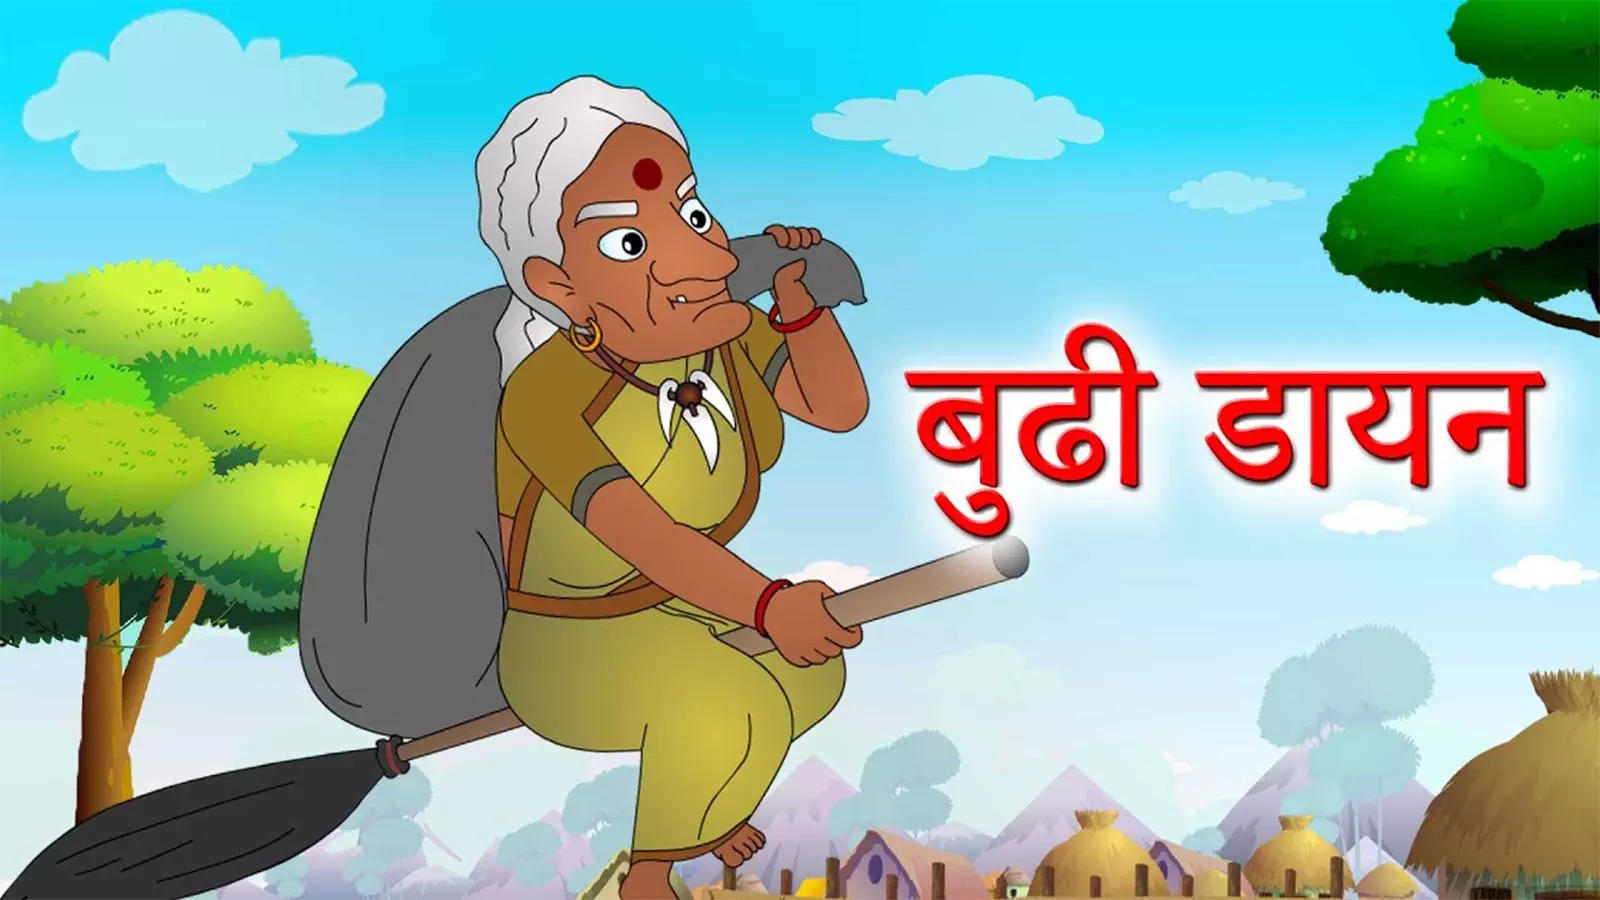 Popular Kids Hindi Story 'Budhi Dayan' For Kids - Check Out Children's  Nursery Rhymes, Baby Songs, Fairy Tales And Many More In Hindi |  Entertainment - Times of India Videos